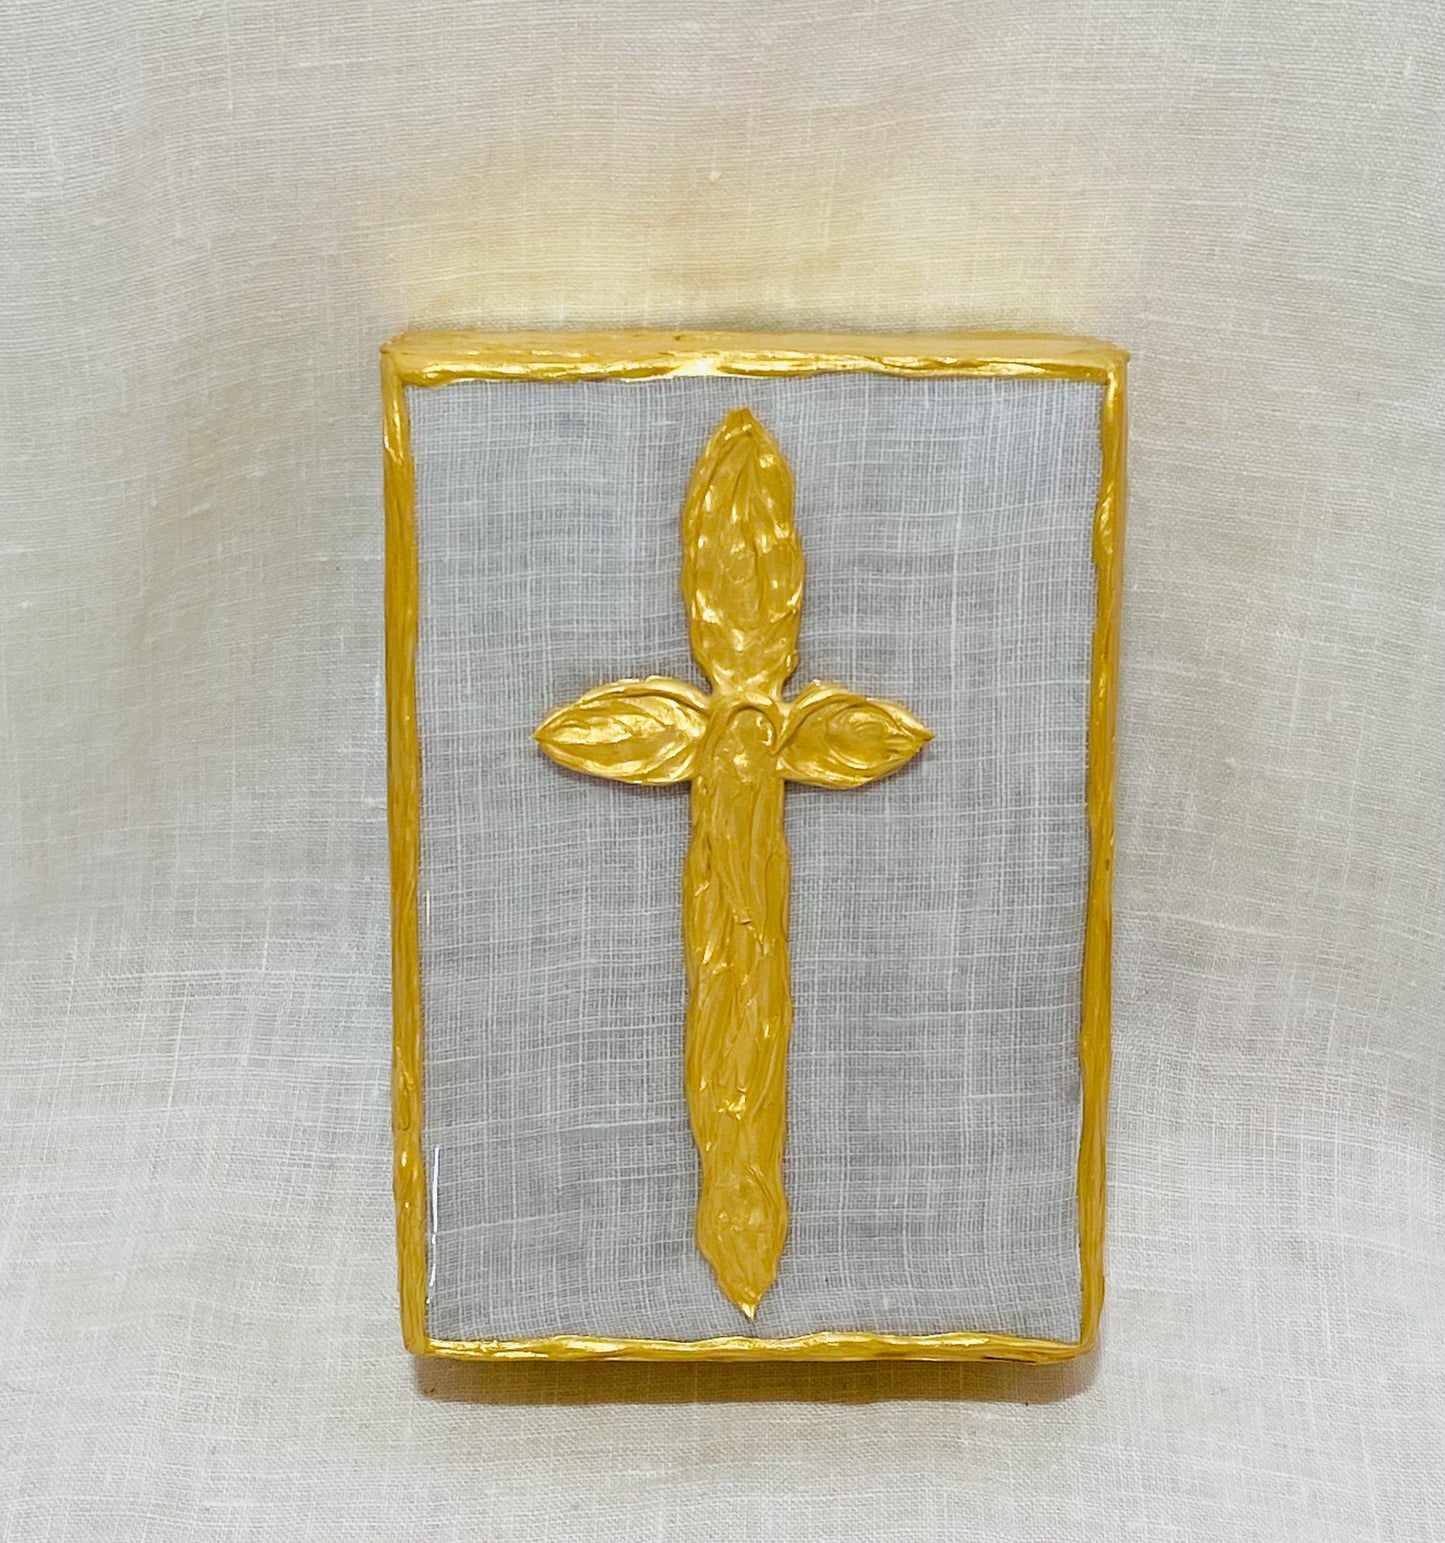 Gold Cross with Grey Tones under White Linen